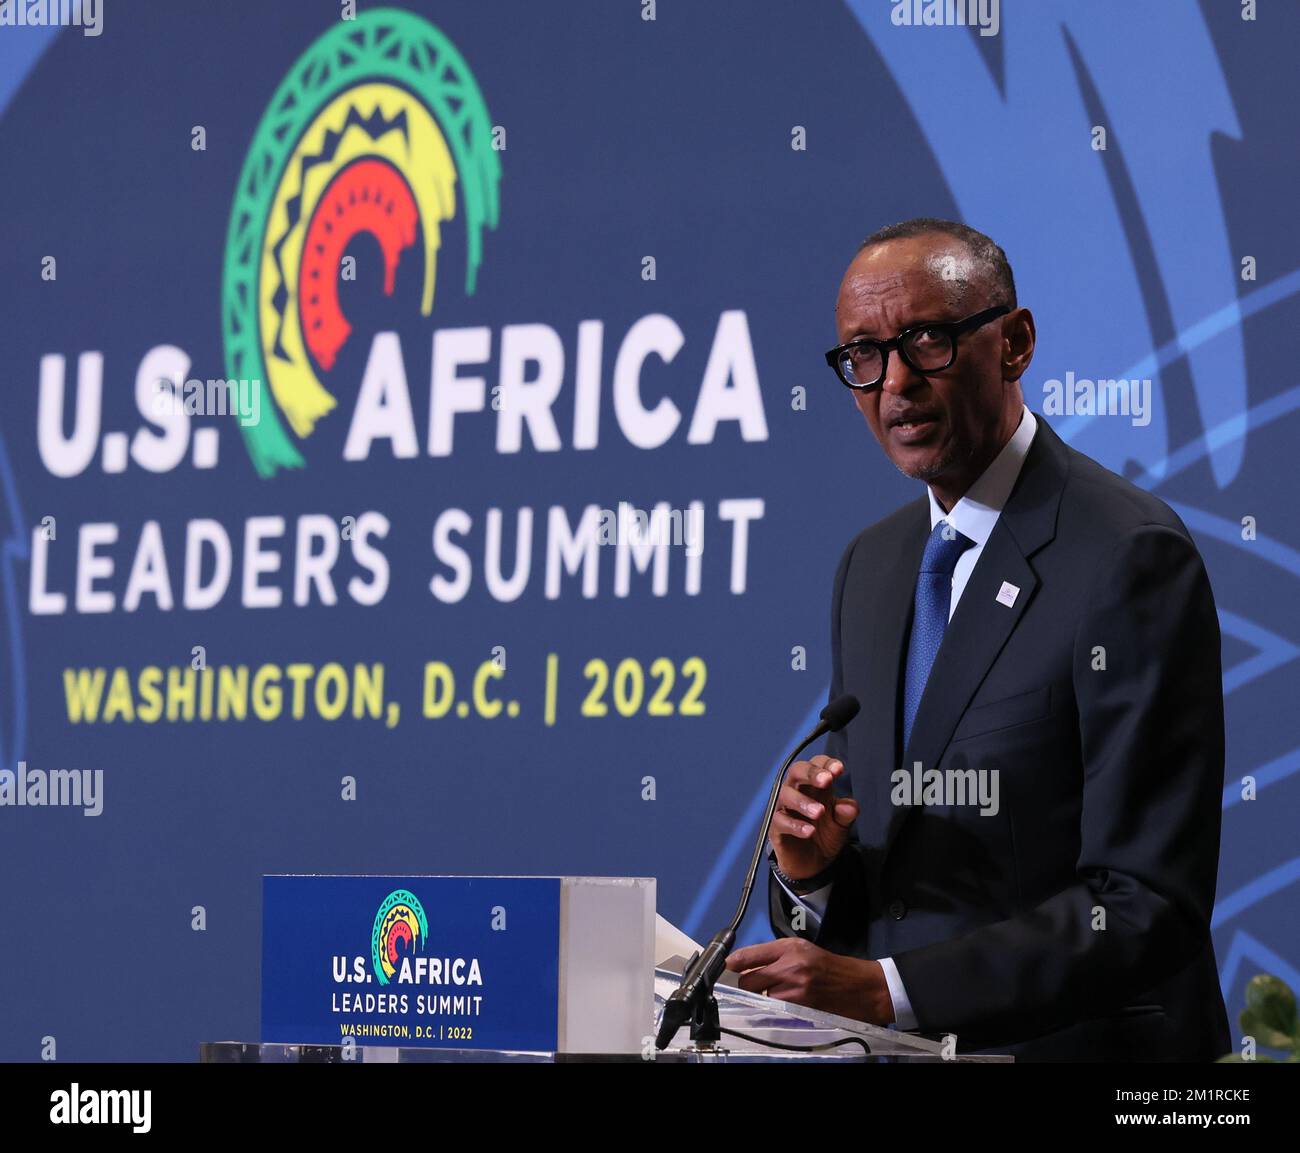 Washington, United States. 13th Dec, 2022. President of Rwanda Paul Kagame speaks during the U.S. Africa Space Forum on the first day of the U.S. Africa Leaders Summit at the Walter E. Washington Convention Center in Washington DC on Tuesday December 13, 2022. Photo by Jemal Countess/UPI Credit: UPI/Alamy Live News Stock Photo